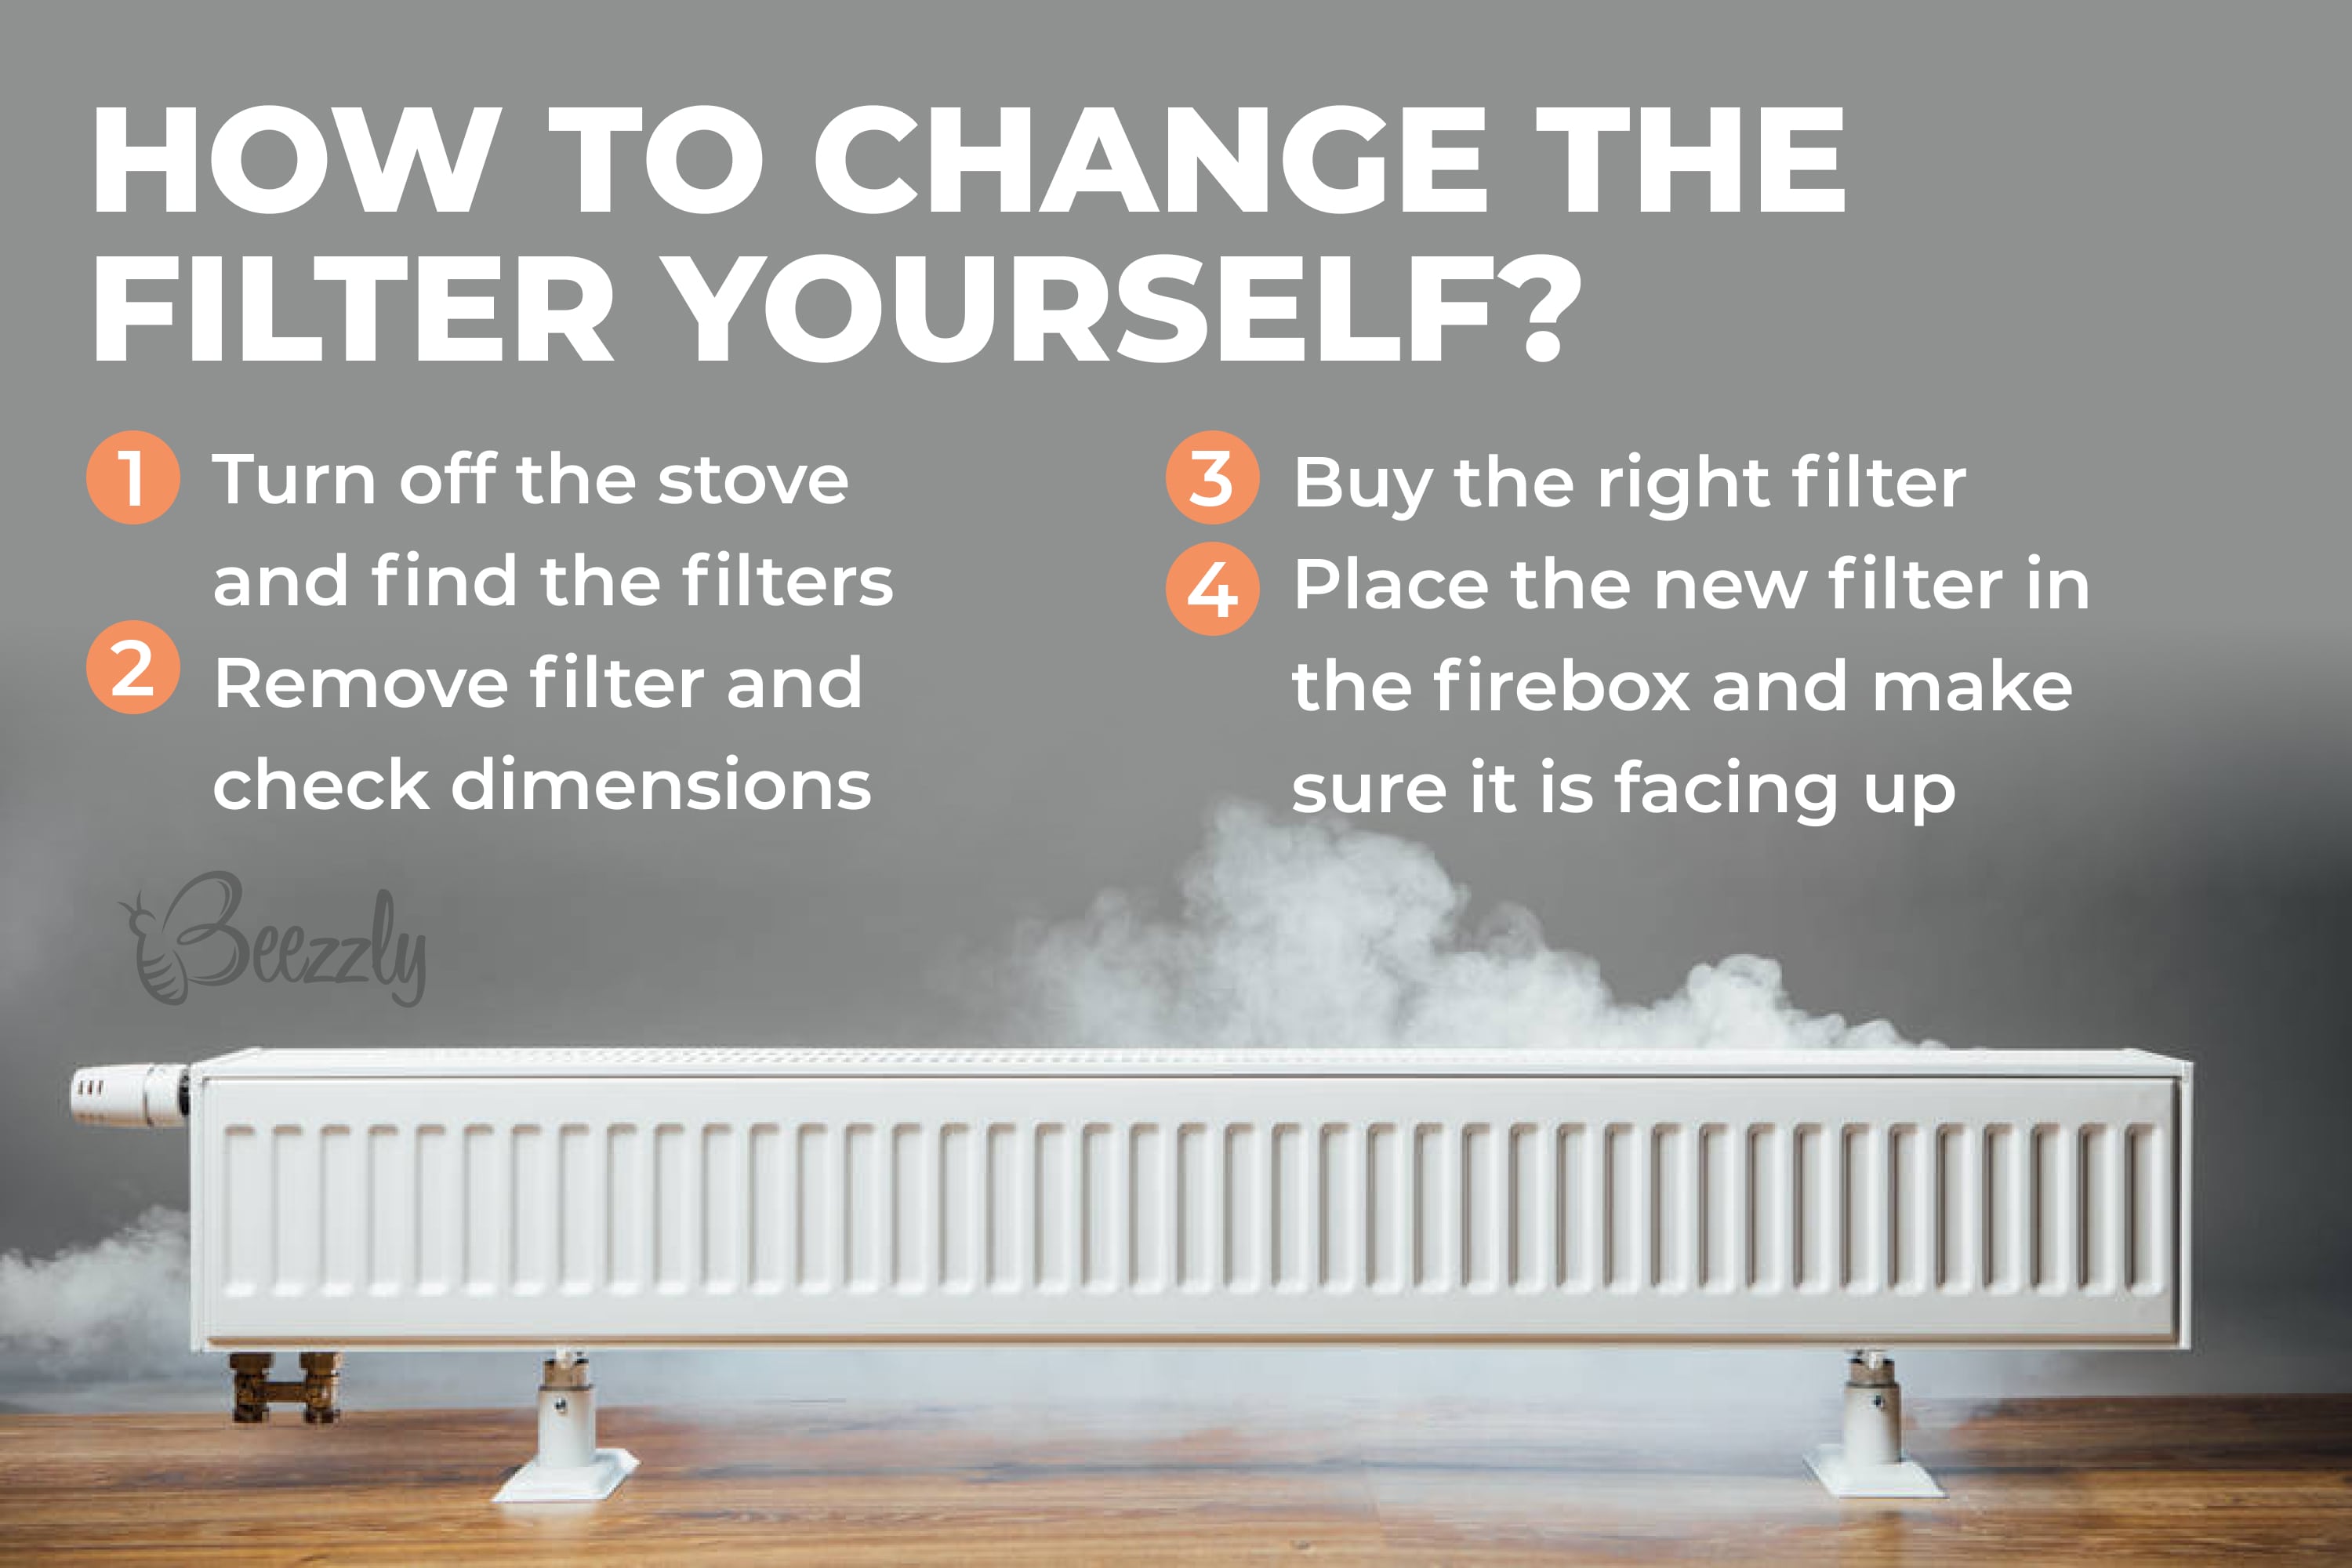 How to change the filter yourself